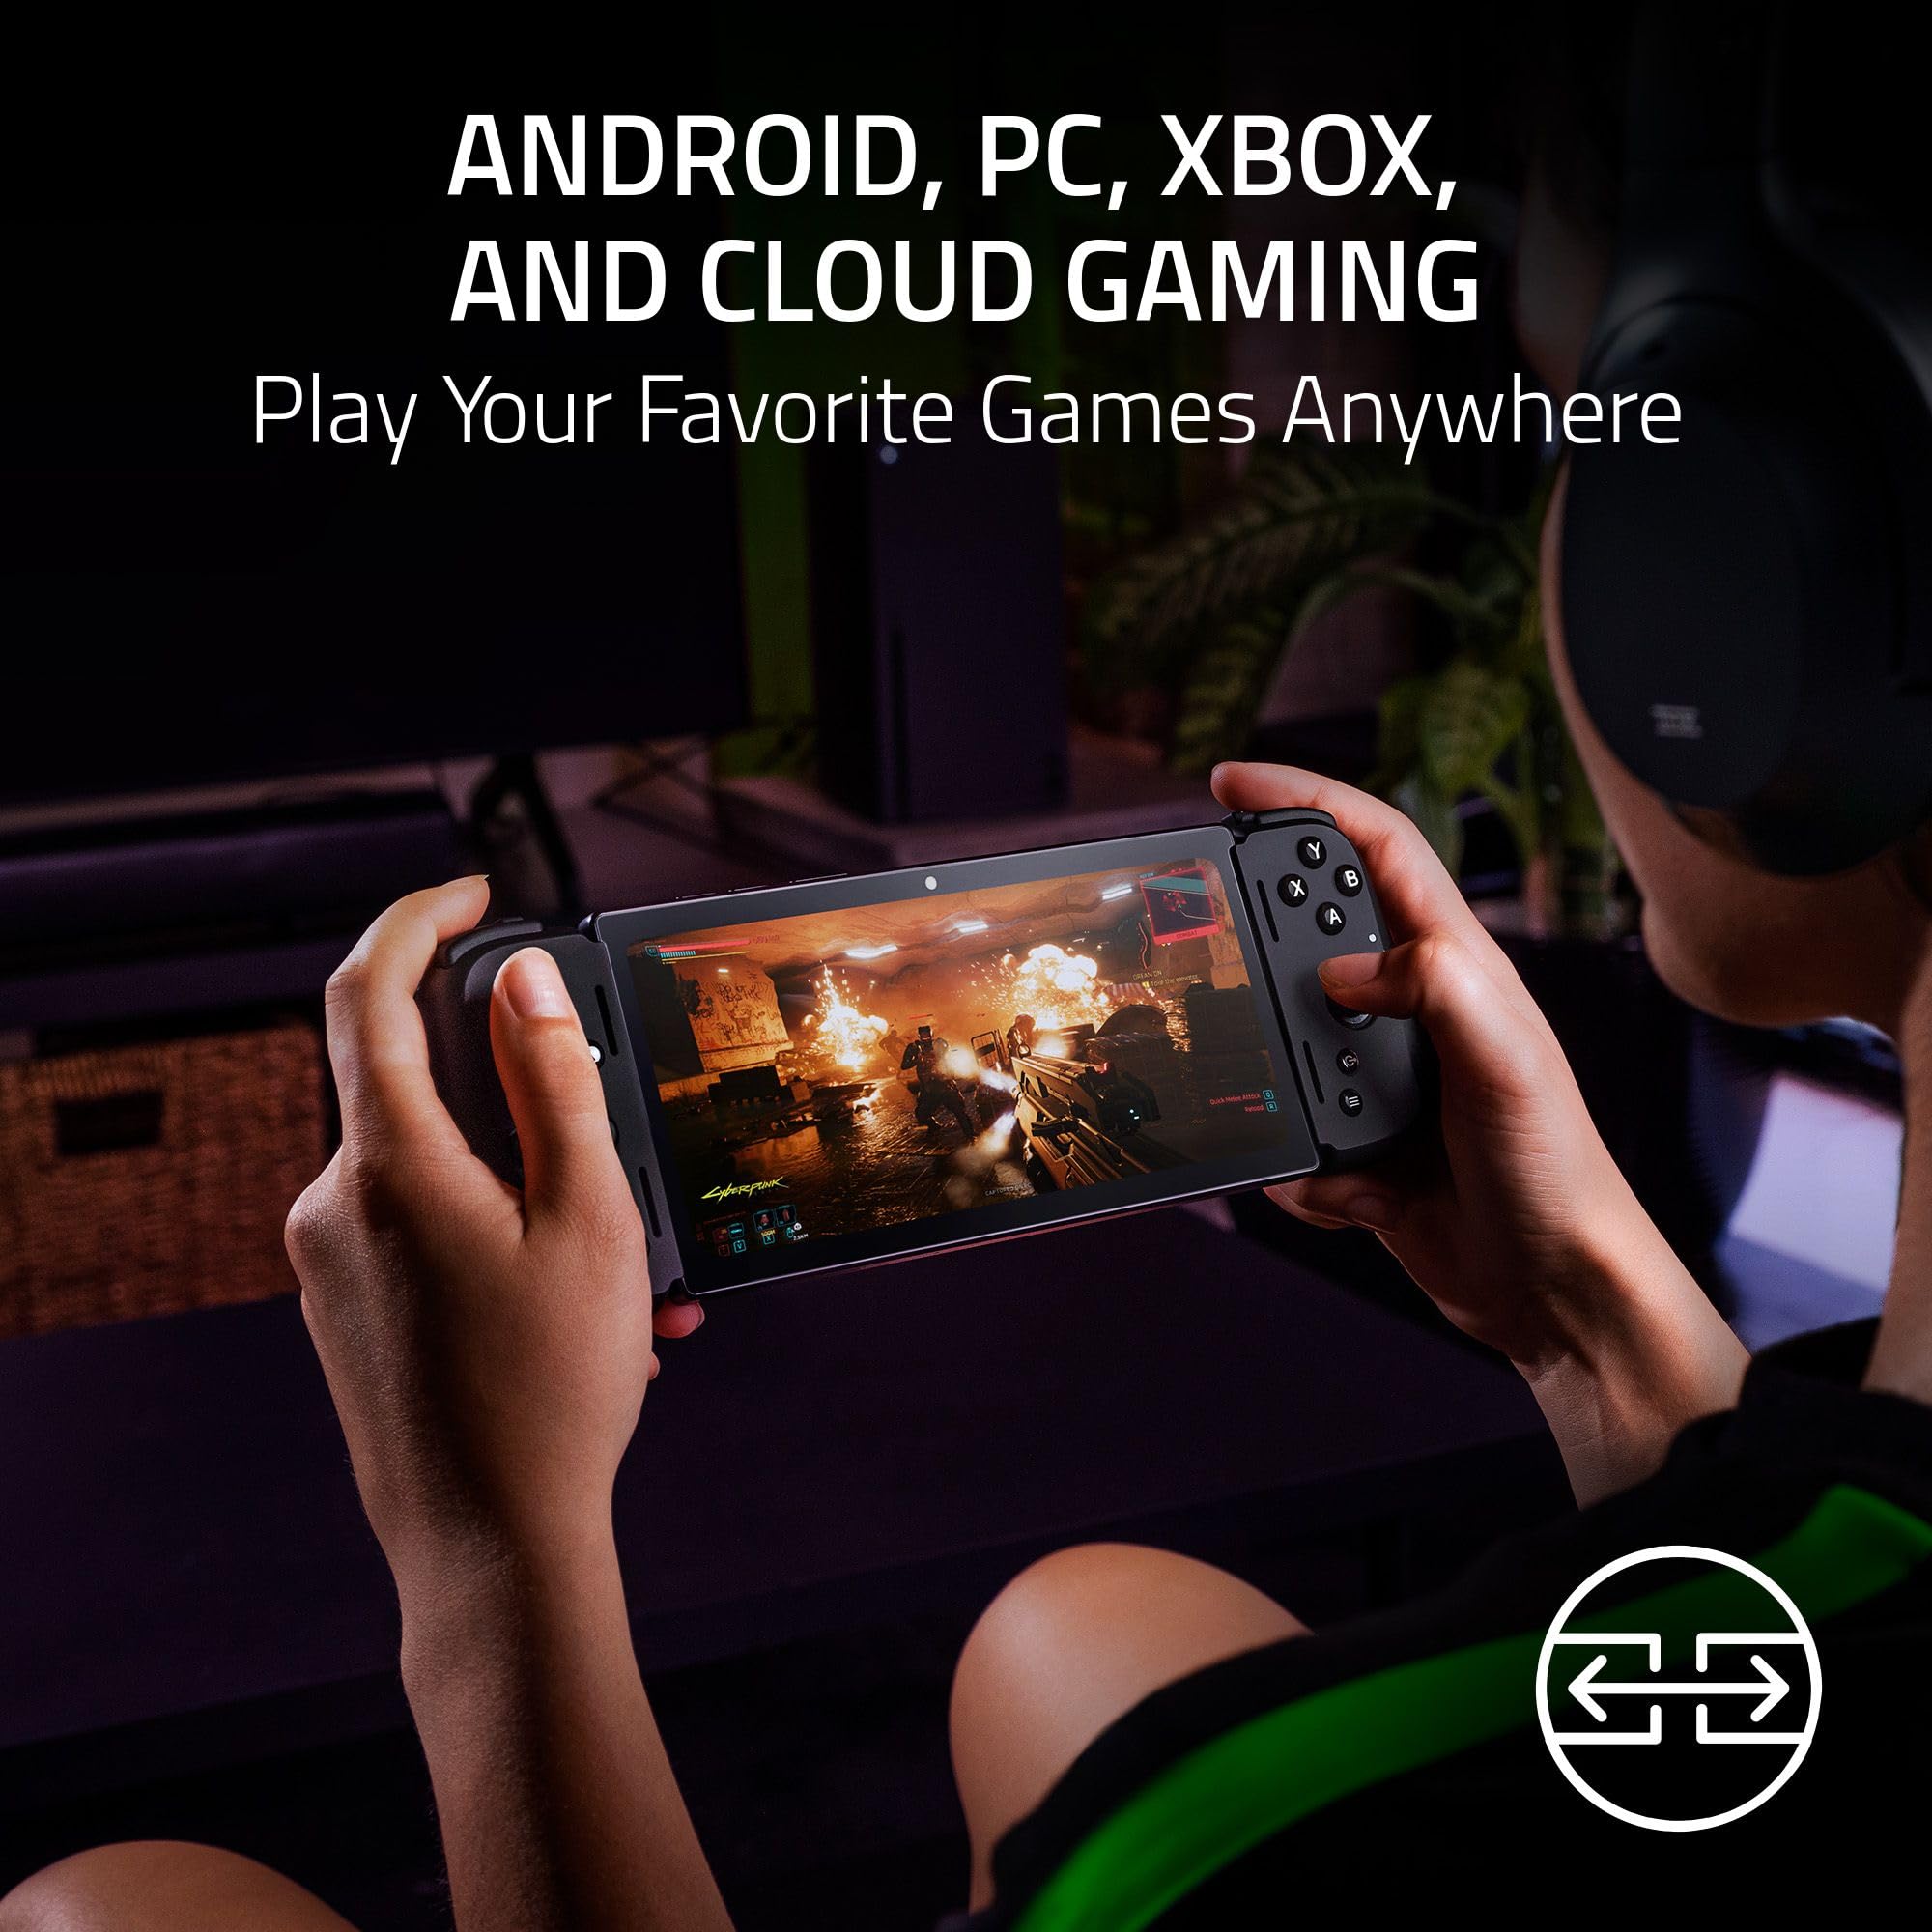 Razer Edge WiFi Gaming Tablet: Snapdragon G3X Gen 1 - Console-Class Control with HyperSense Haptics - 6.8” 144Hz AMOLED FHD+ Touchscreen - Android, PC, Xbox, Cloud Gaming - Powered Nexus App